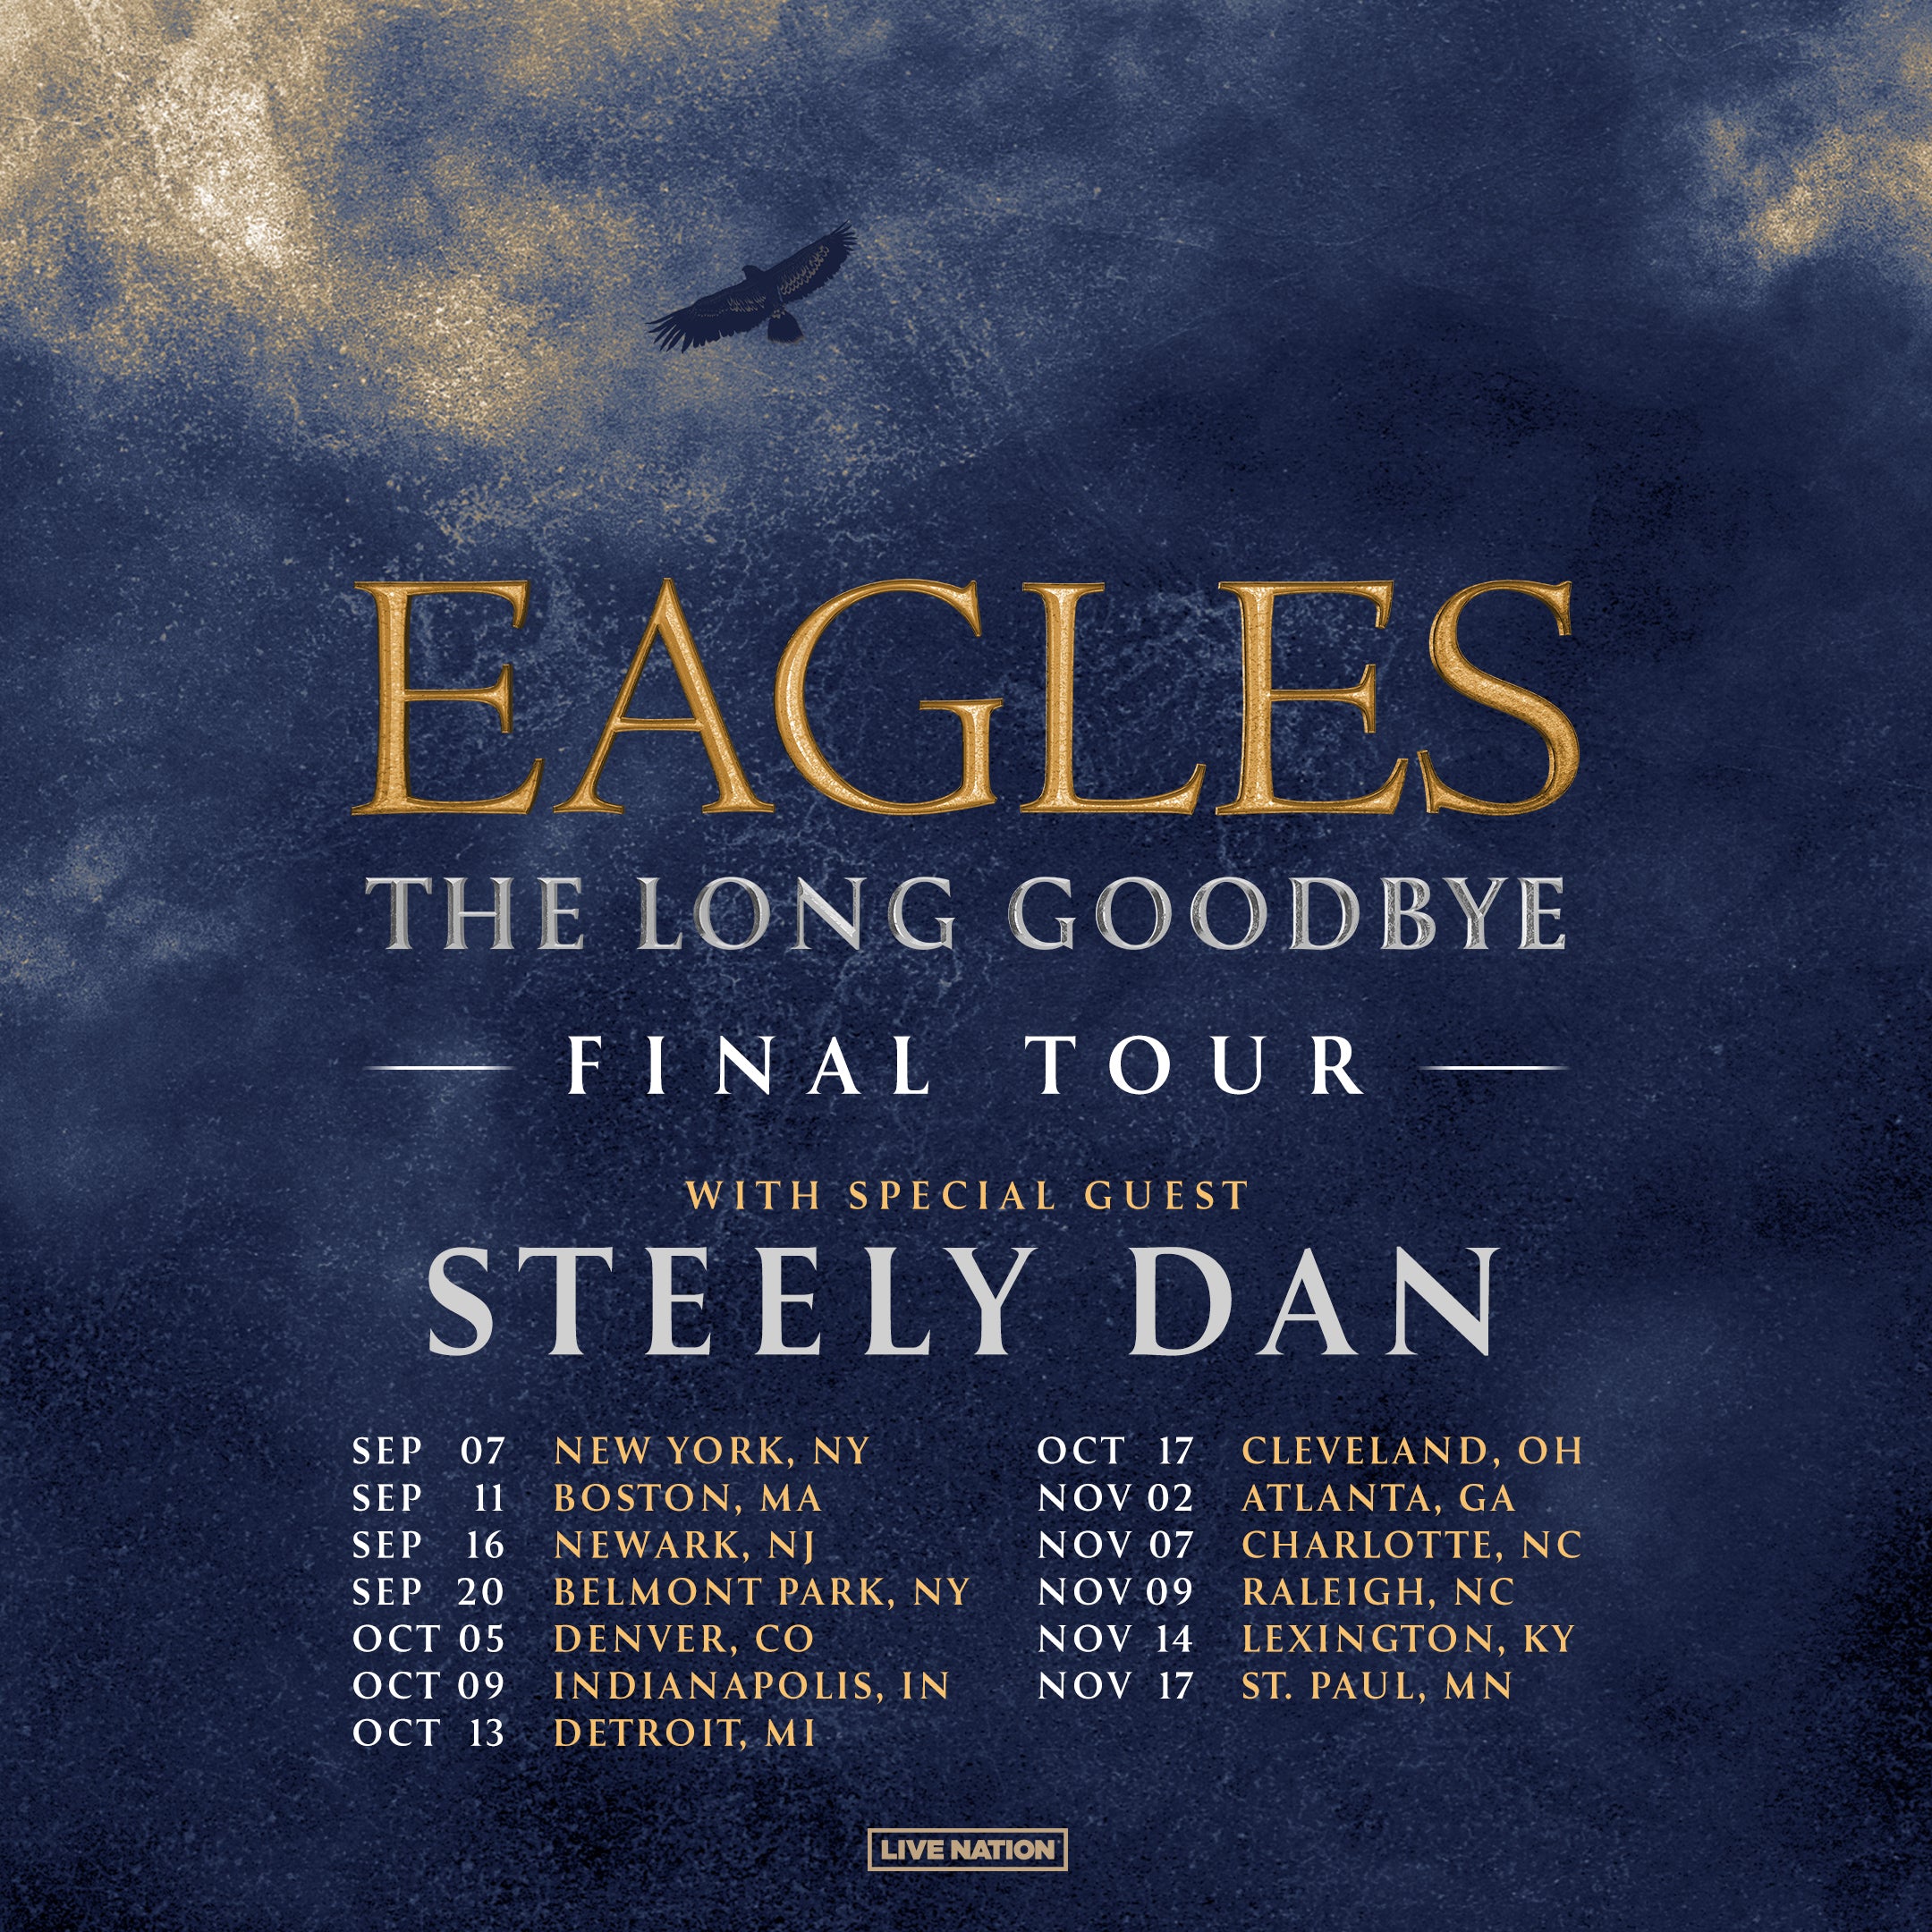 the eagles tour poster